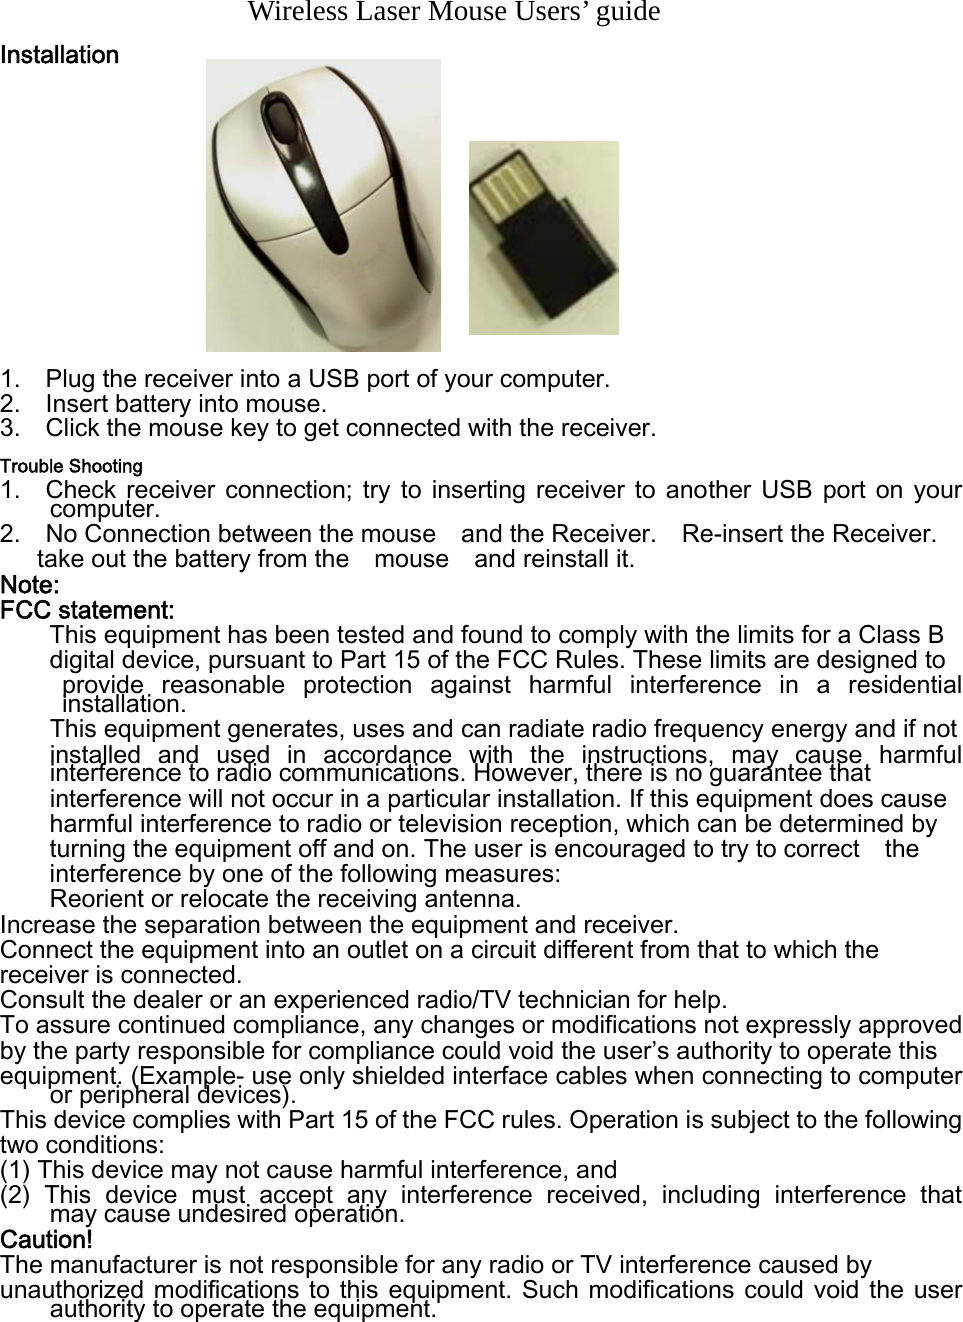       Wireless Laser Mouse Users’ guide Installation             1.    Plug the receiver into a USB port of your computer. 2.    Insert battery into mouse.   3.    Click the mouse key to get connected with the receiver.   Trouble Shooting 1.    Check  receiver  connection;  try  to  inserting  receiver  to  another  USB  port  on  your computer. 2.    No Connection between the mouse    and the Receiver.    Re-insert the Receiver.   take out the battery from the    mouse    and reinstall it.     Note: FCC statement: This equipment has been tested and found to comply with the limits for a Class B   digital device, pursuant to Part 15 of the FCC Rules. These limits are designed to   provide  reasonable  protection  against  harmful  interference  in  a  residential installation. This equipment generates, uses and can radiate radio frequency energy and if not   installed  and  used  in  accordance  with  the  instructions,  may  cause  harmful interference to radio communications. However, there is no guarantee that   interference will not occur in a particular installation. If this equipment does cause harmful interference to radio or television reception, which can be determined by   turning the equipment off and on. The user is encouraged to try to correct    the interference by one of the following measures: Reorient or relocate the receiving antenna. Increase the separation between the equipment and receiver. Connect the equipment into an outlet on a circuit different from that to which the   receiver is connected. Consult the dealer or an experienced radio/TV technician for help. To assure continued compliance, any changes or modifications not expressly approved   by the party responsible for compliance could void the user’s authority to operate this   equipment. (Example- use only shielded interface cables when connecting to computer or peripheral devices). This device complies with Part 15 of the FCC rules. Operation is subject to the following   two conditions: (1) This device may not cause harmful interference, and (2)  This  device  must  accept  any  interference  received,  including interference that    may cause undesired operation.   Caution! The manufacturer is not responsible for any radio or TV interference caused by   unauthorized modifications to this equipment.  Such  modifications  could void  the  user authority to operate the equipment.  